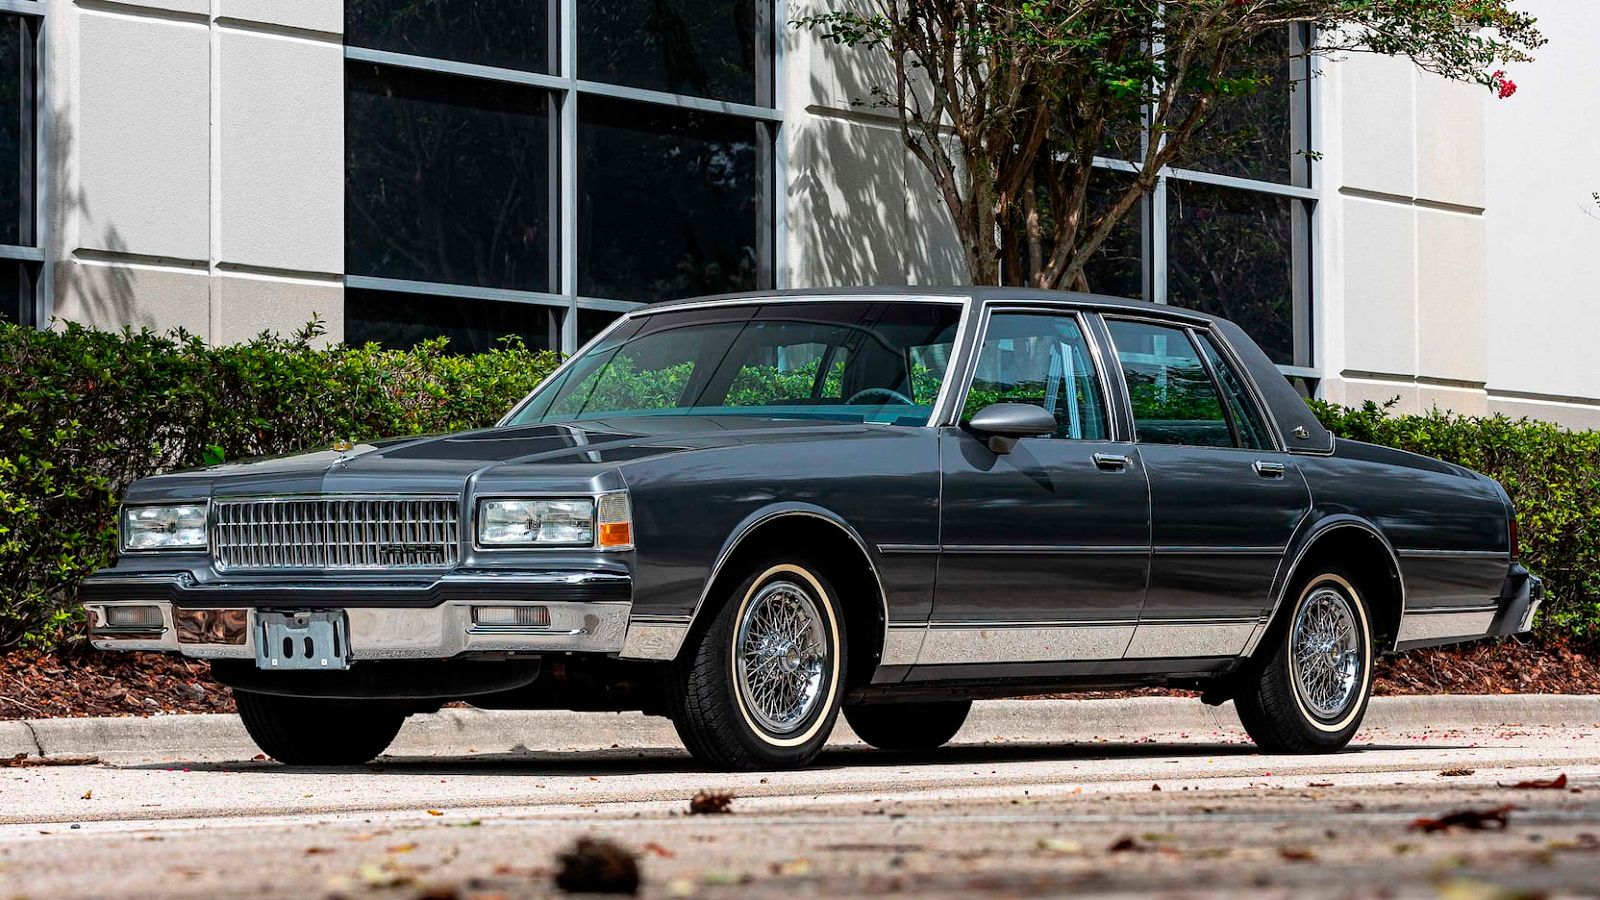 A parked 1990 Chevrolet Caprice Classic Brougham